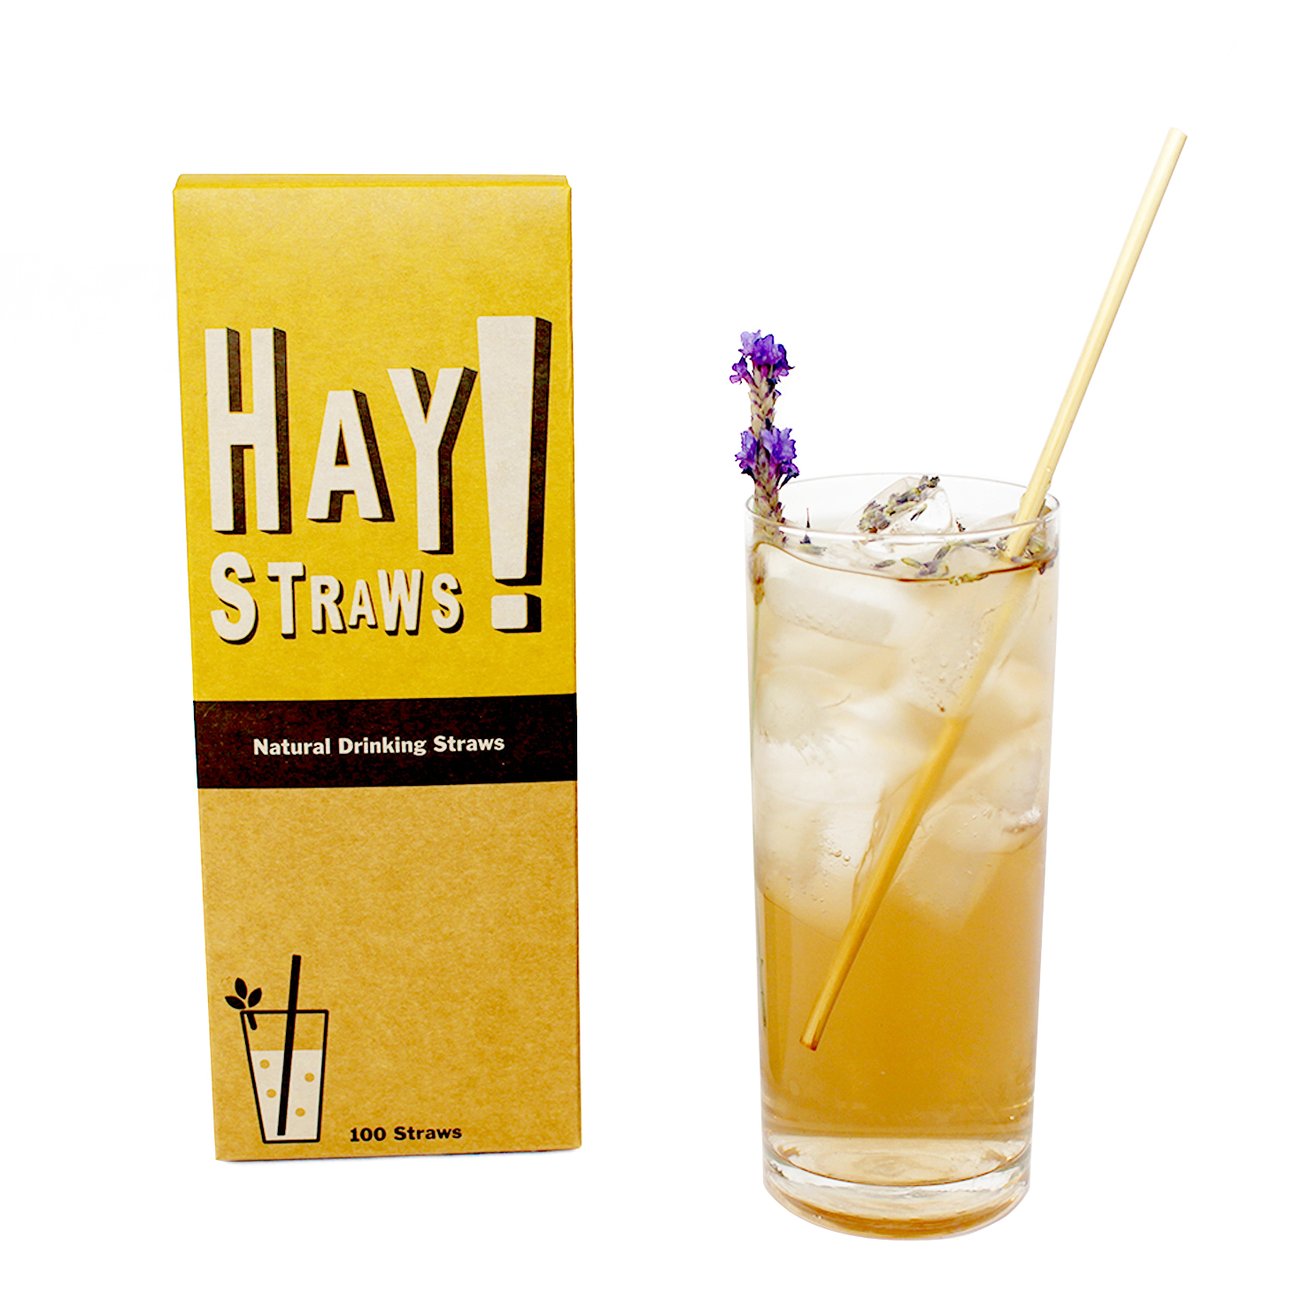 Supply Chain Scene, image of Hay! Straws with a beverage glass 